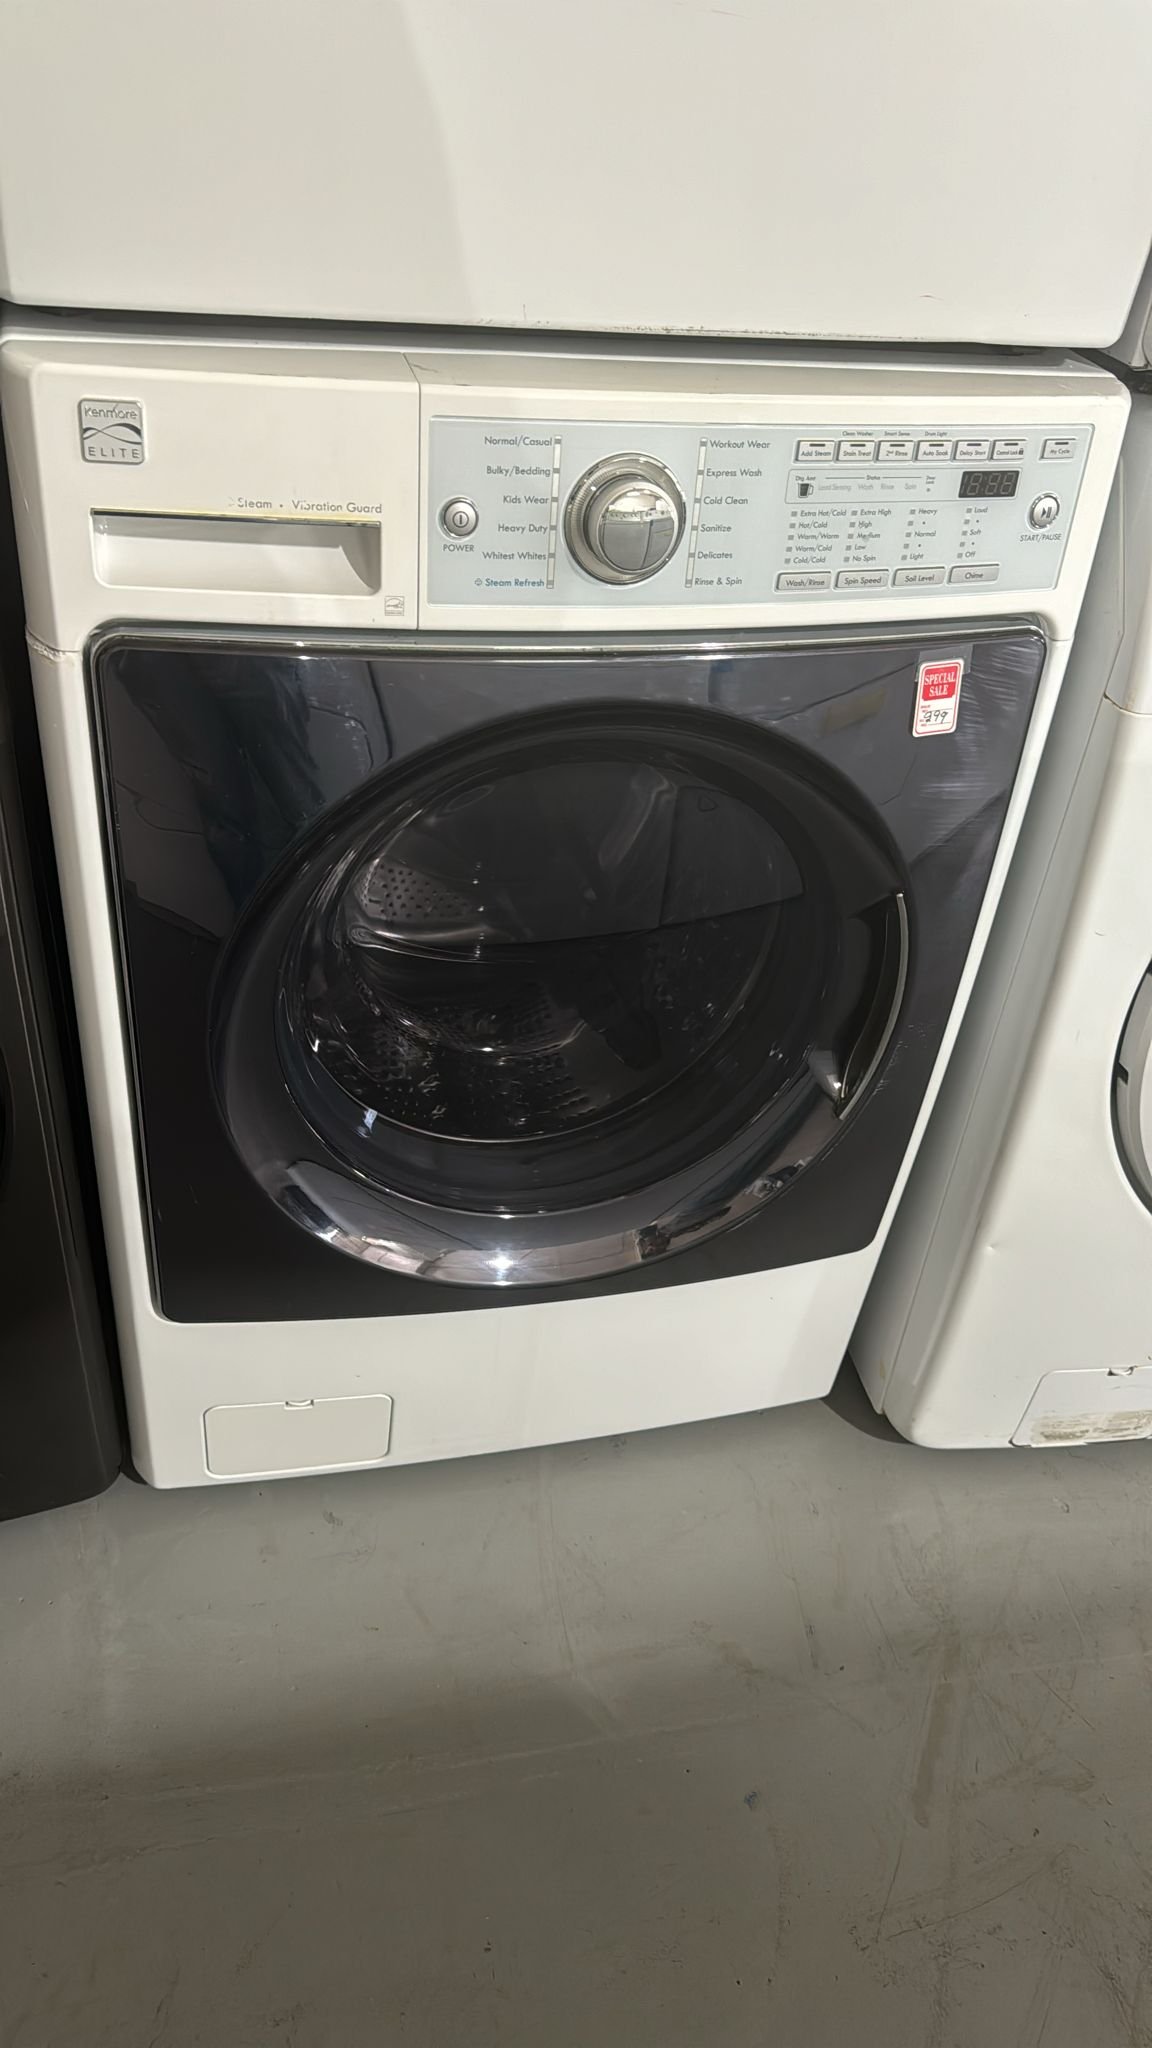 Kenmore Used Front Load Washer – White and Black